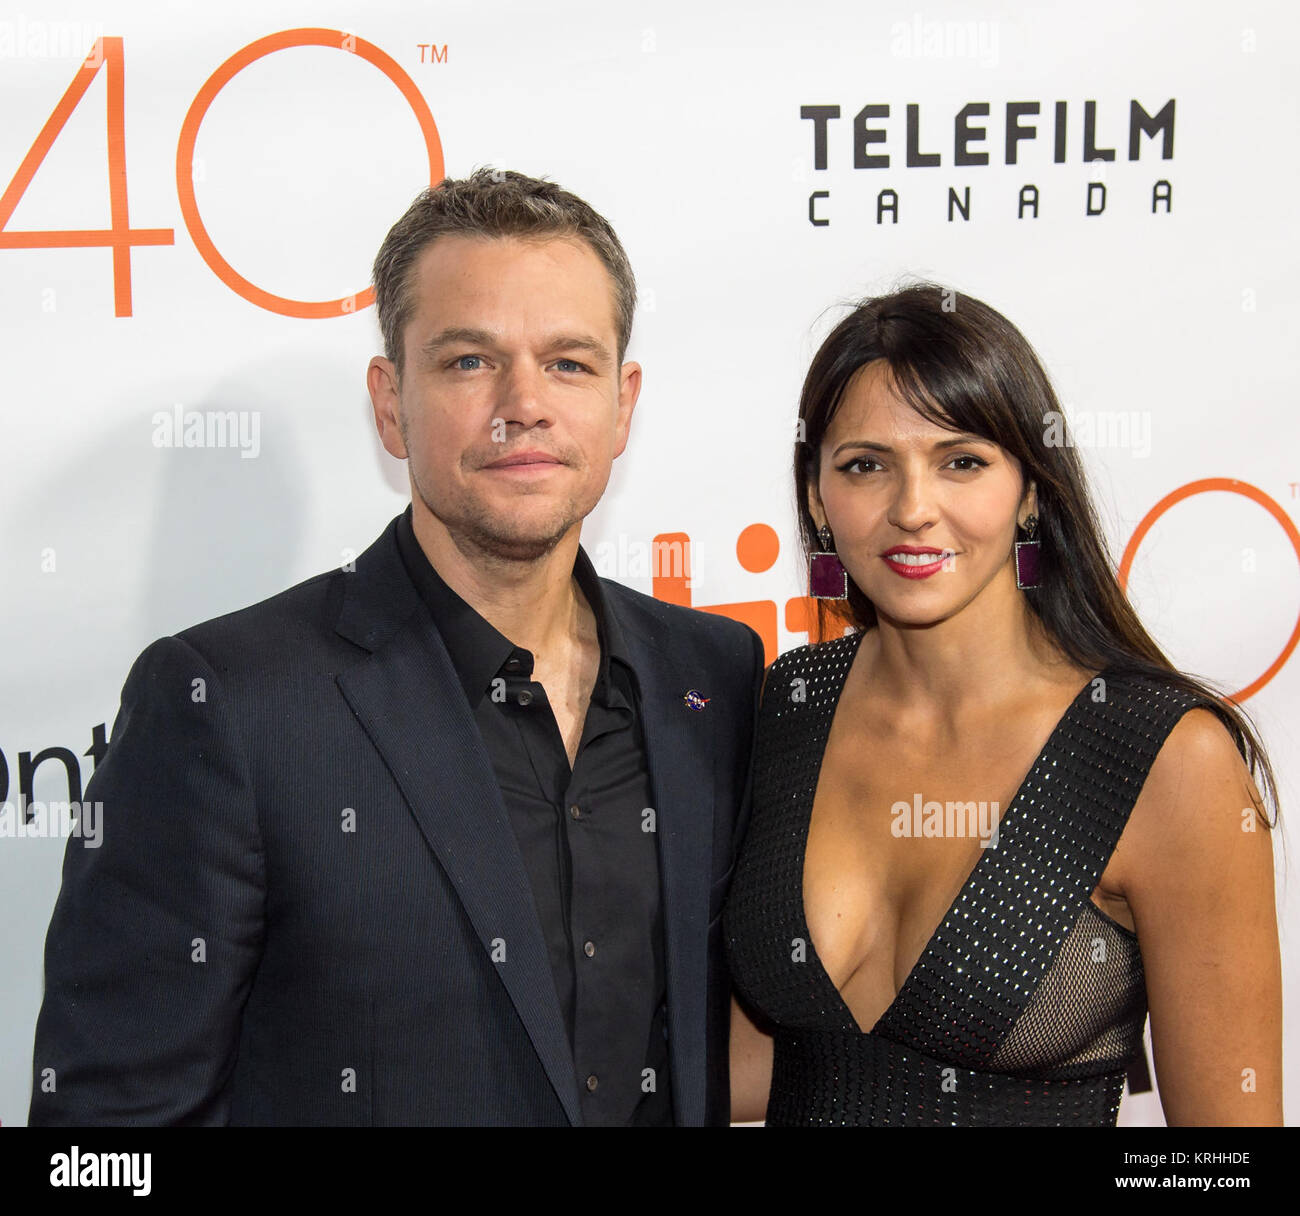 Actor Matt Damon and his wife Luciana Bozán Barroso attend the world premiere for "The Martian” on day two of the Toronto International Film Festival at the Roy Thomson Hall Friday, Sept. 11, 2015 in Toronto. NASA scientists and engineers served as technical consultants on the film. The movie portrays a realistic view of the climate and topography of Mars, based on NASA data, and some of the challenges NASA faces as we prepare for human exploration of the Red Planet in the 2030s. Photo Credit: (NASA/Bill Ingalls) 'The Martian' World Premiere (NHQ201509110004) Stock Photo